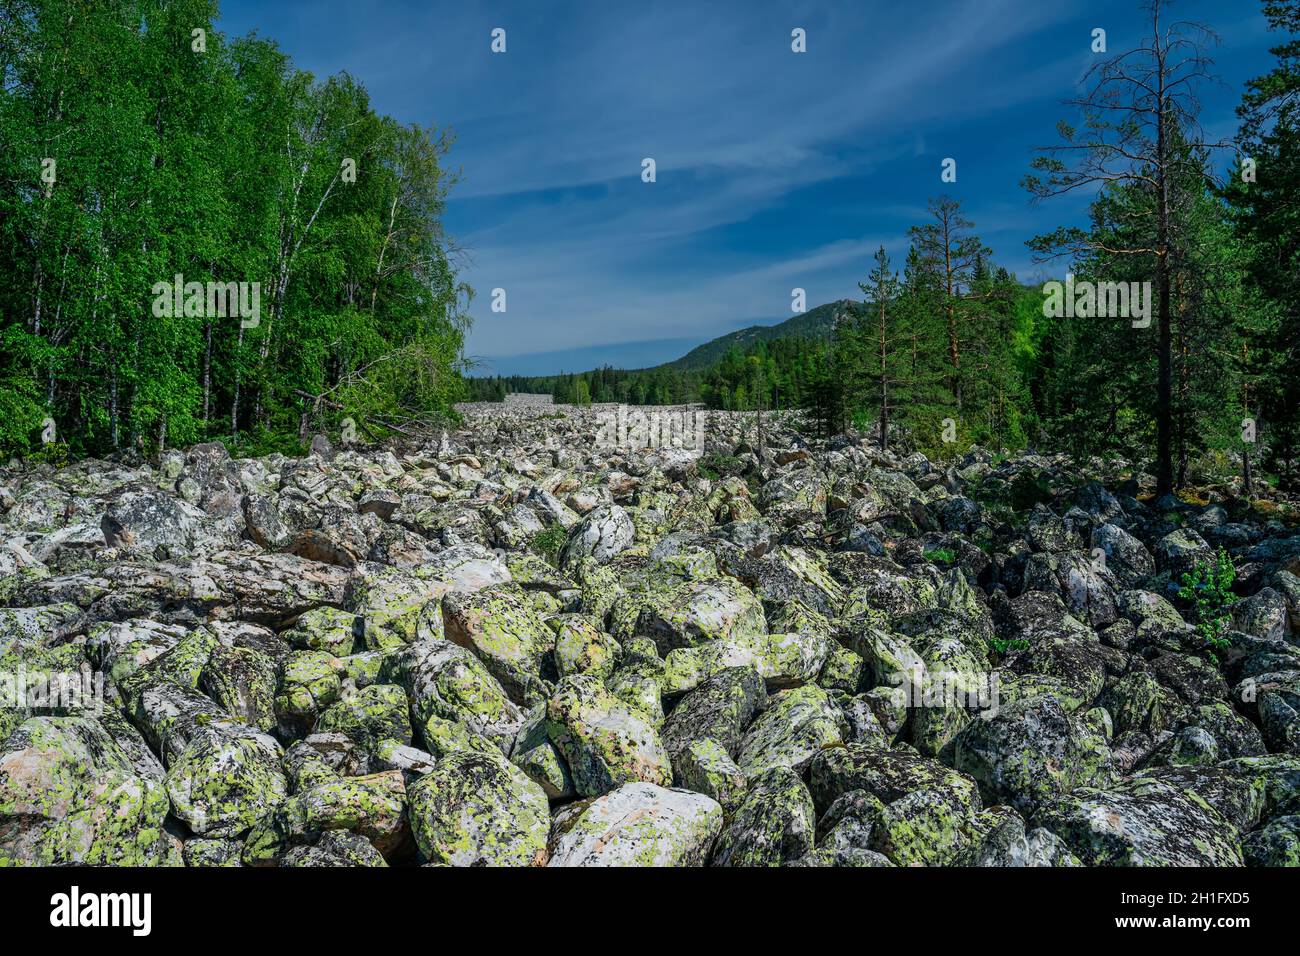 The river of rocks or Stone River. Taganay National Park in Southern Urals, Russia. The Ural mountains. Stock Photo